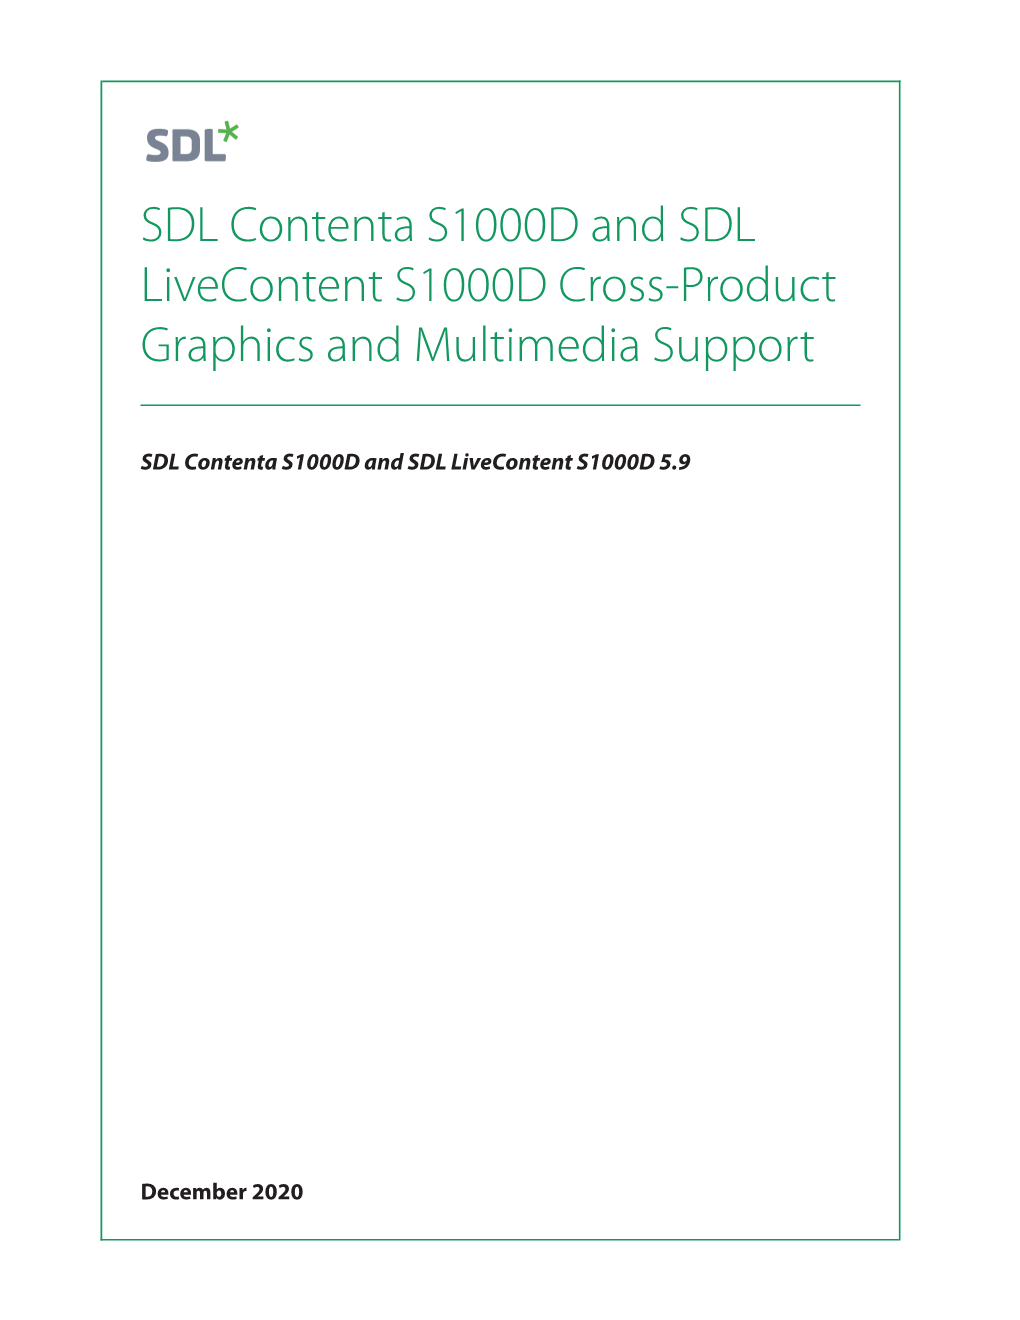 SDL Contenta S1000D and SDL Livecontent S1000D Cross-Product Graphics and Multimedia Support